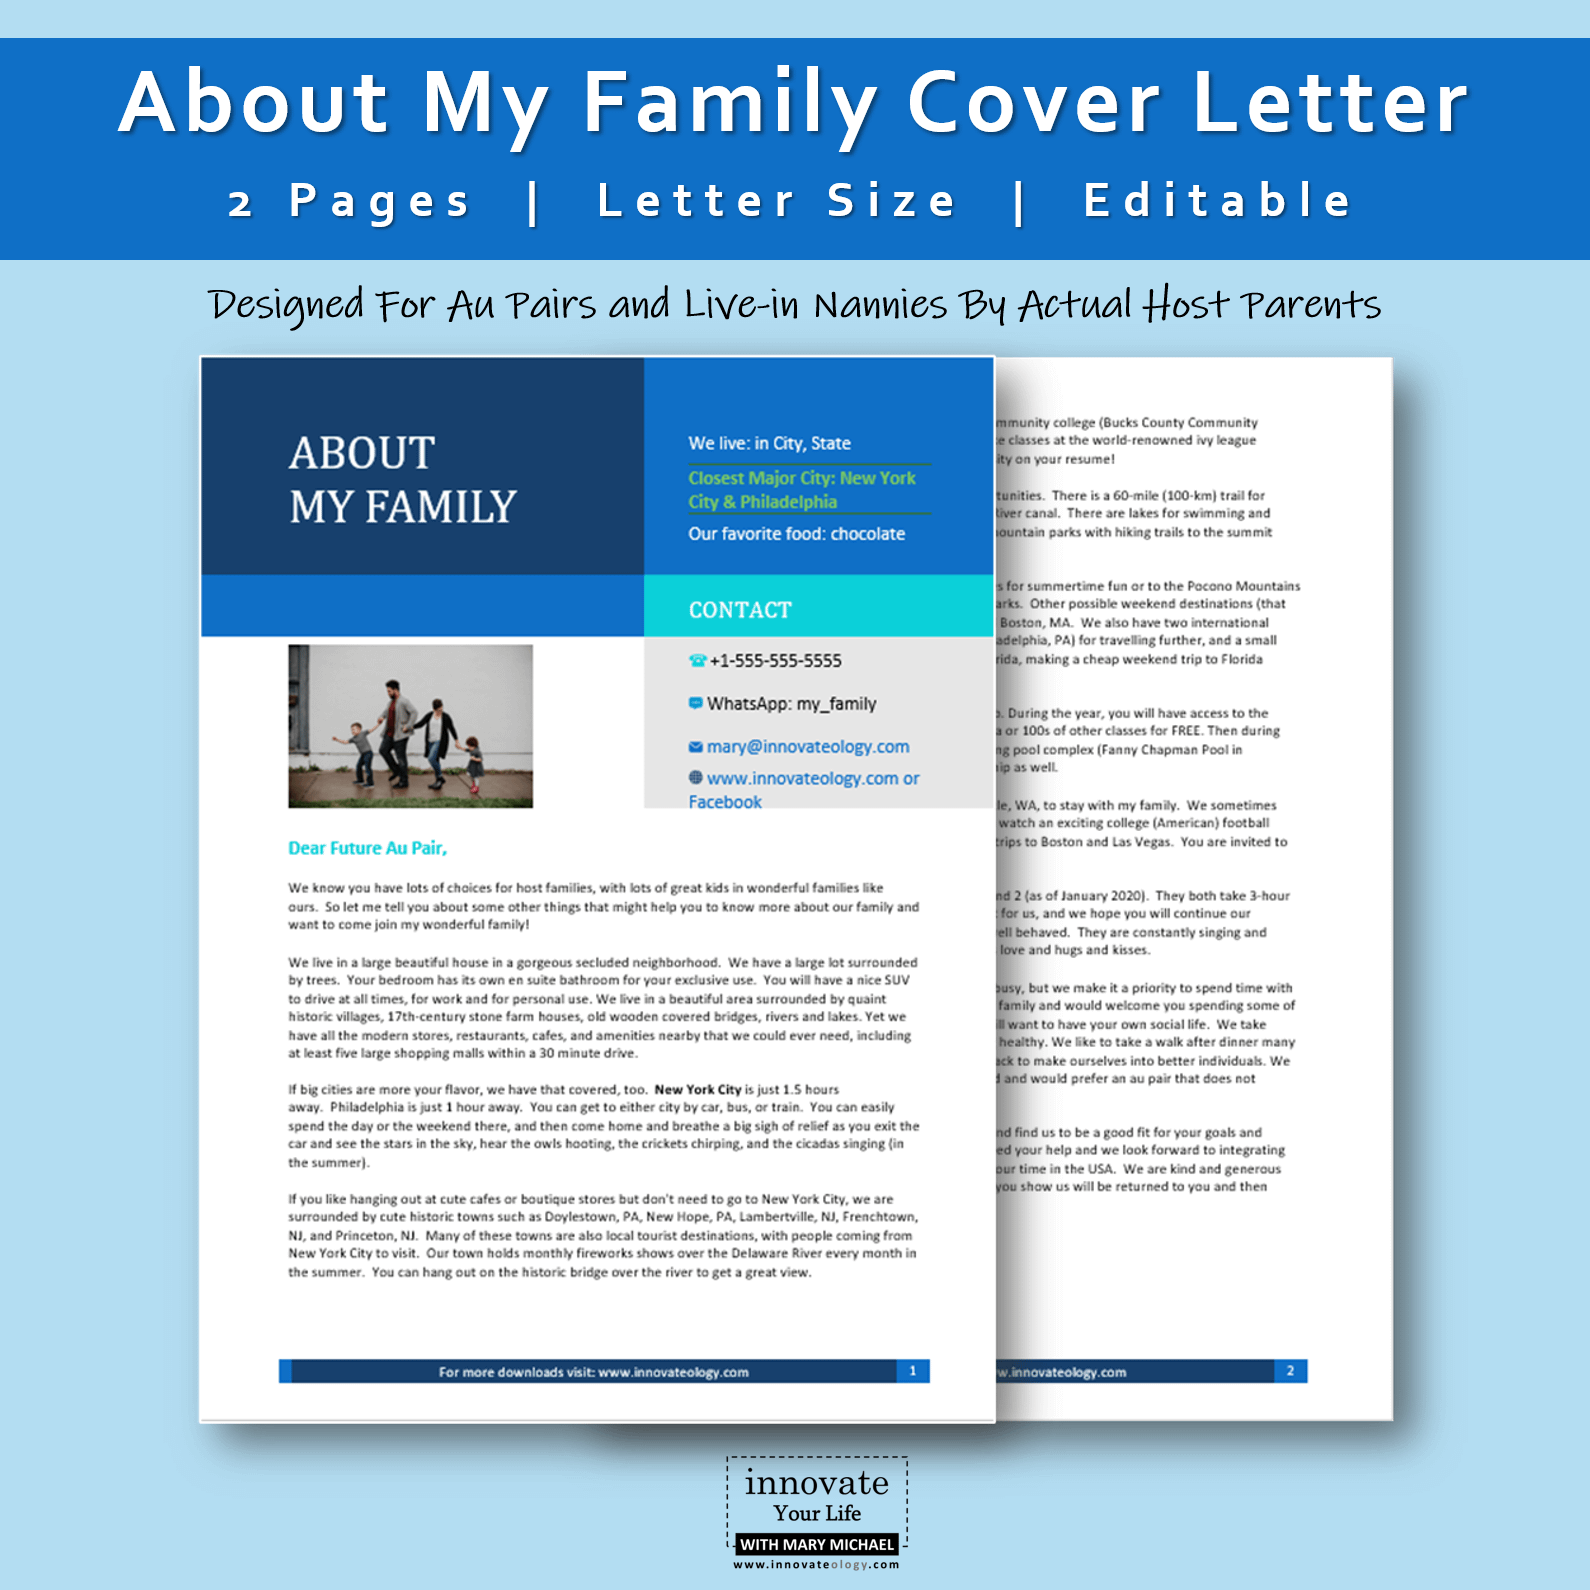 Editable About My Family Letter For Potential Caregiver Or Au Pair Innovate Your Life With Mary Michael